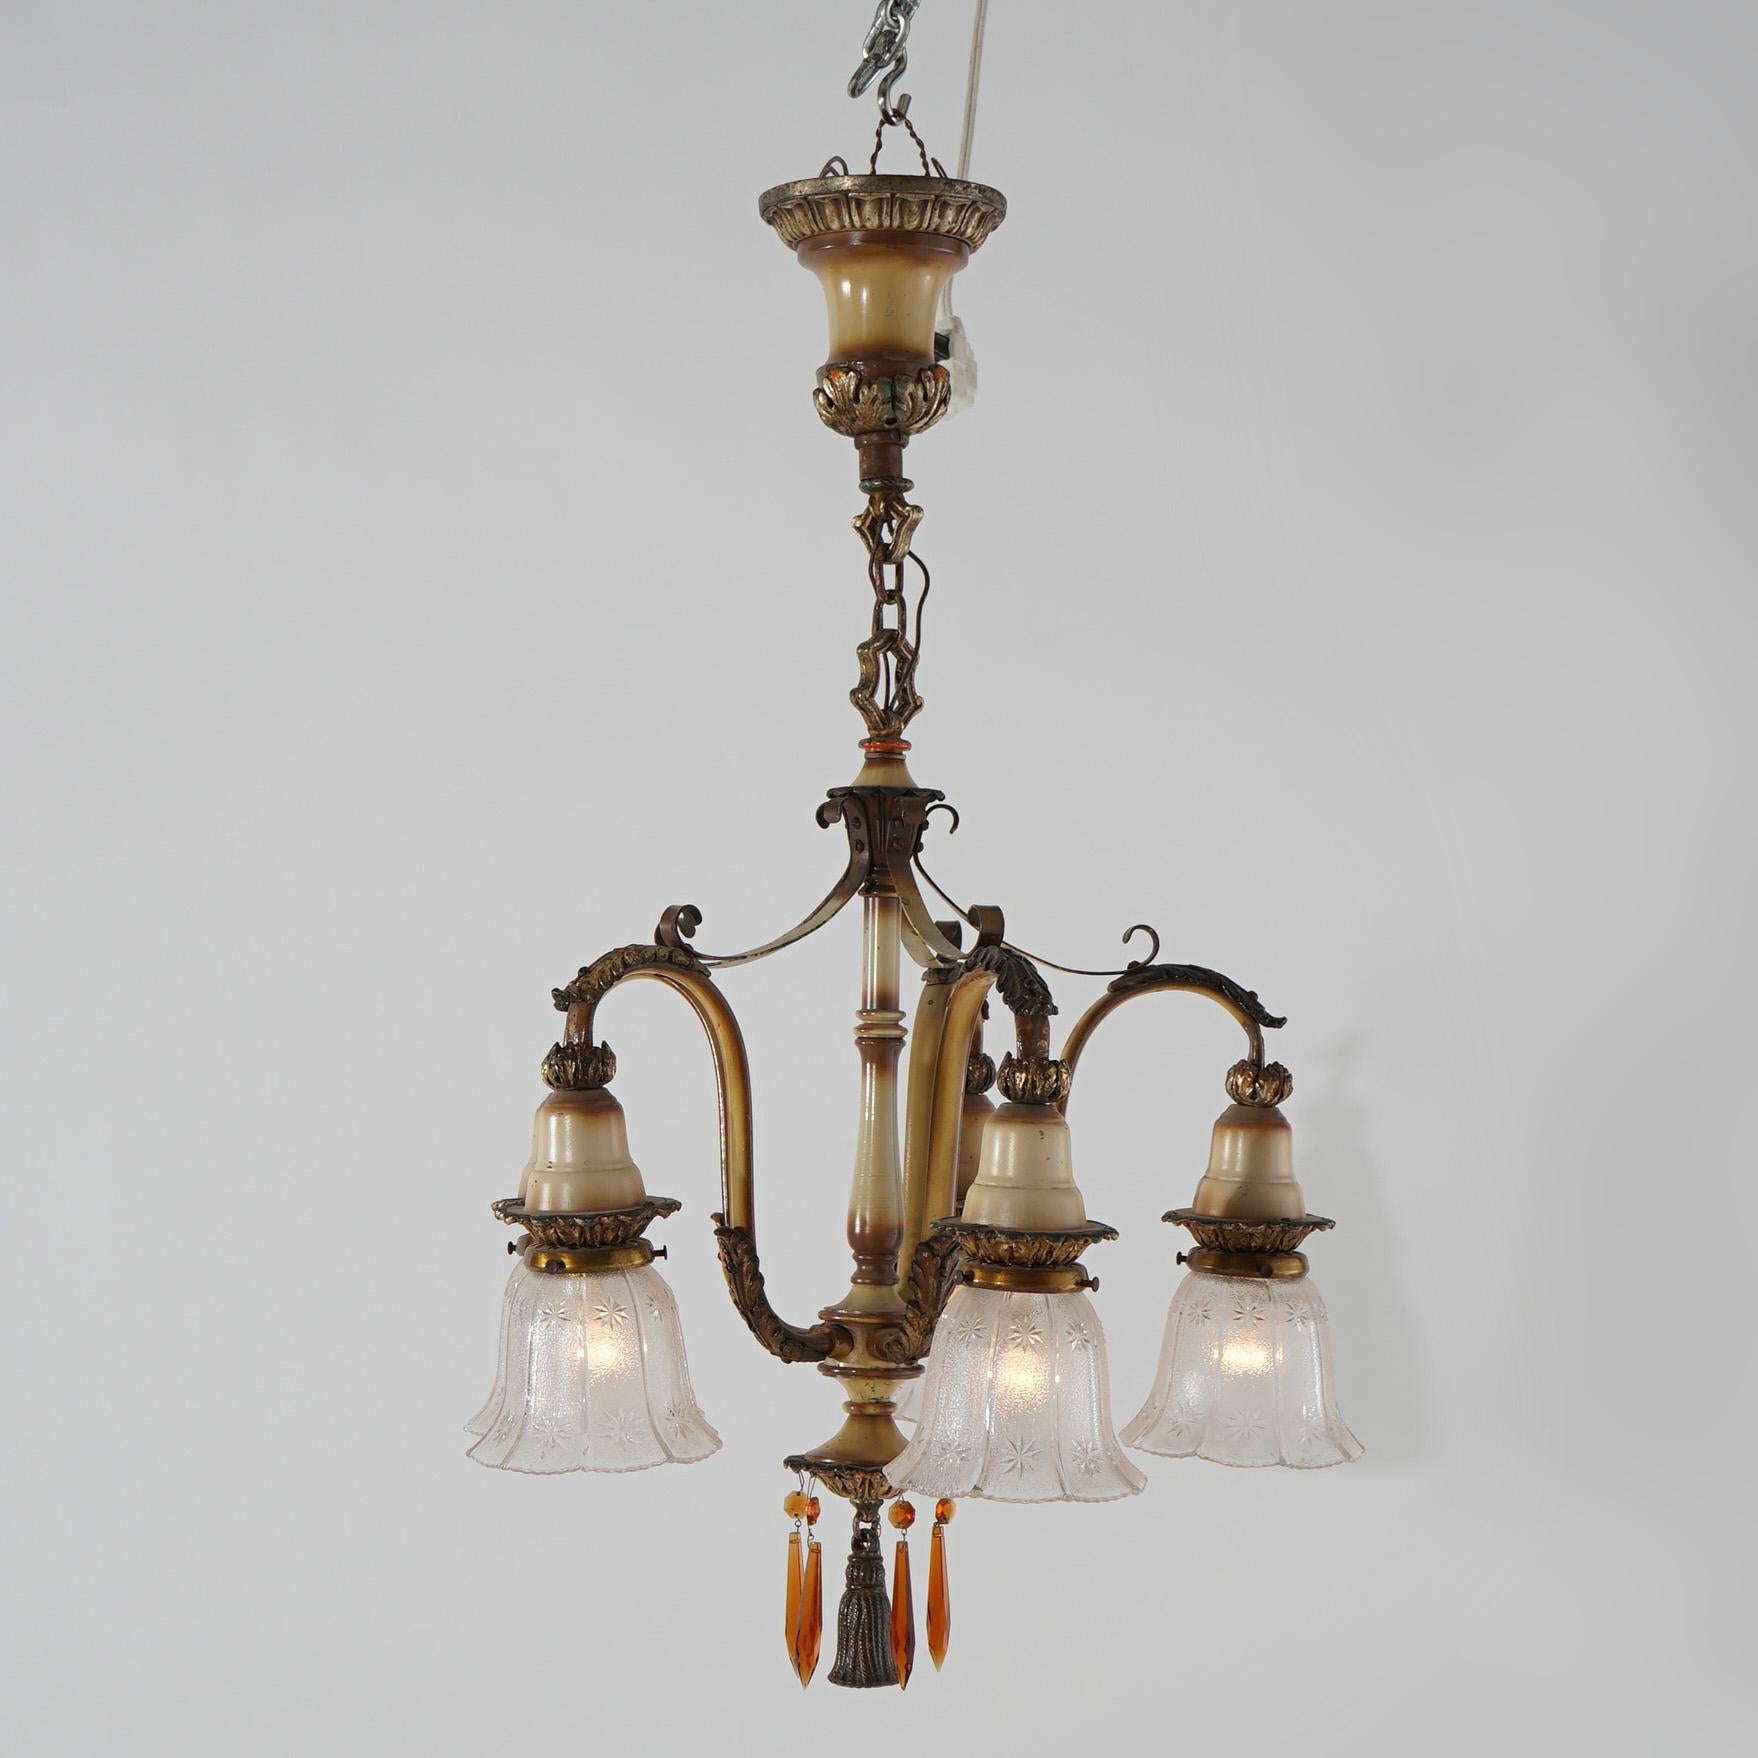 An antique Arts & Crafts five-light chandelier offers polychromed and gilt metal frame with scroll form arms and foliate elements, circa 1920

Measures - 29.5